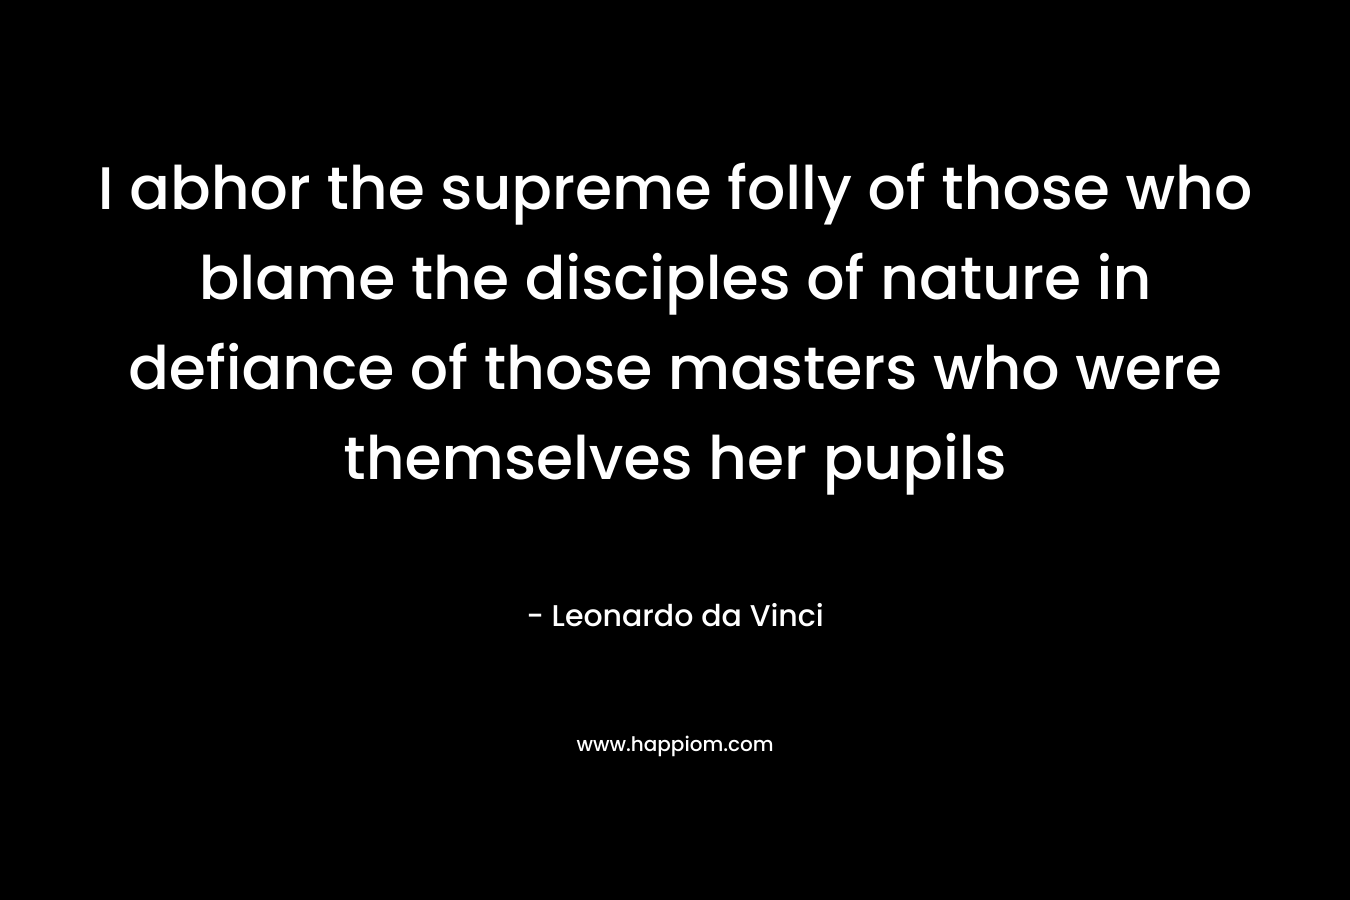 I abhor the supreme folly of those who blame the disciples of nature in defiance of those masters who were themselves her pupils